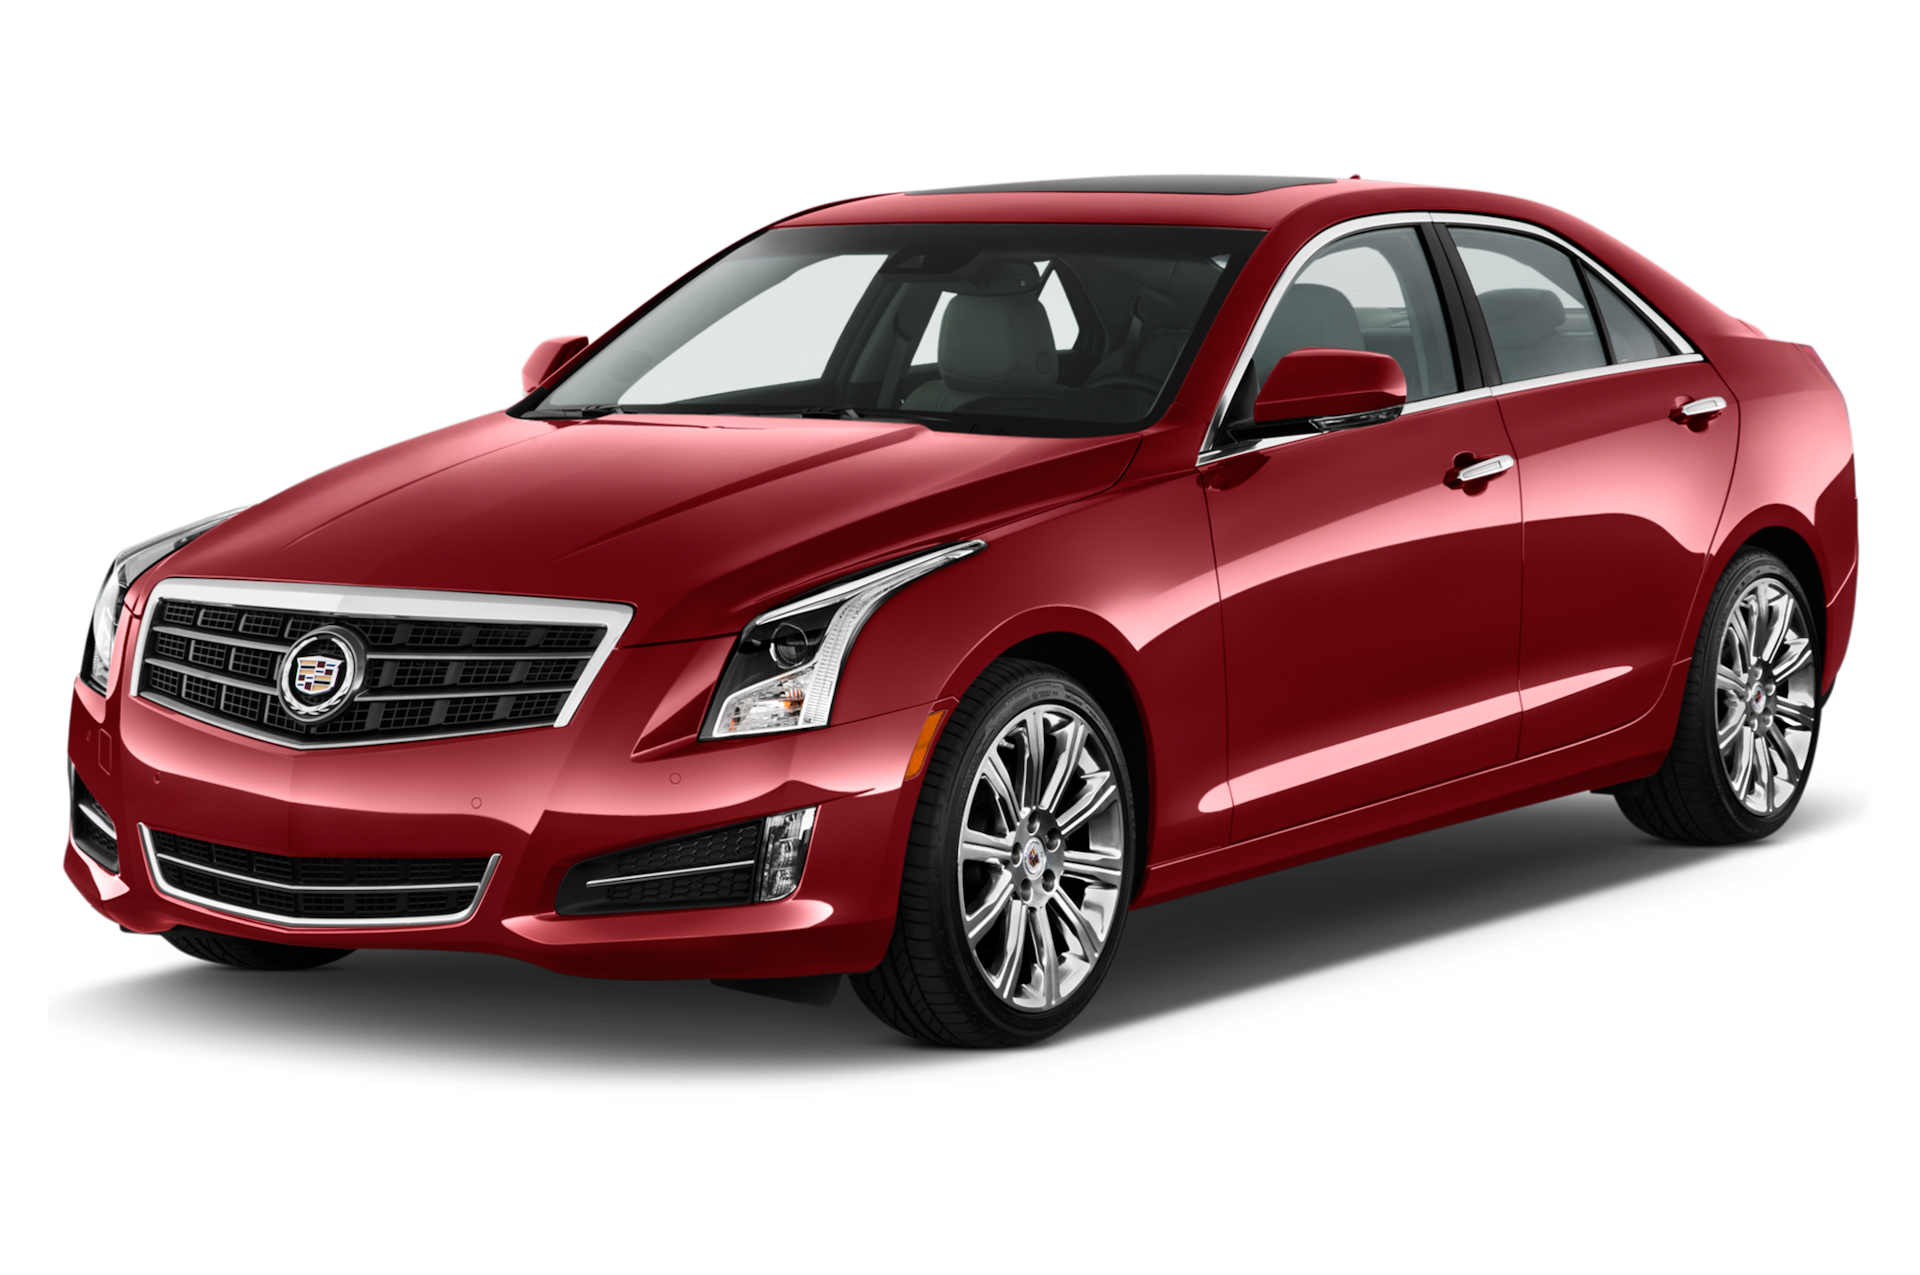 2014 Cadillac ATS Prices, Reviews, and Photos - MotorTrend